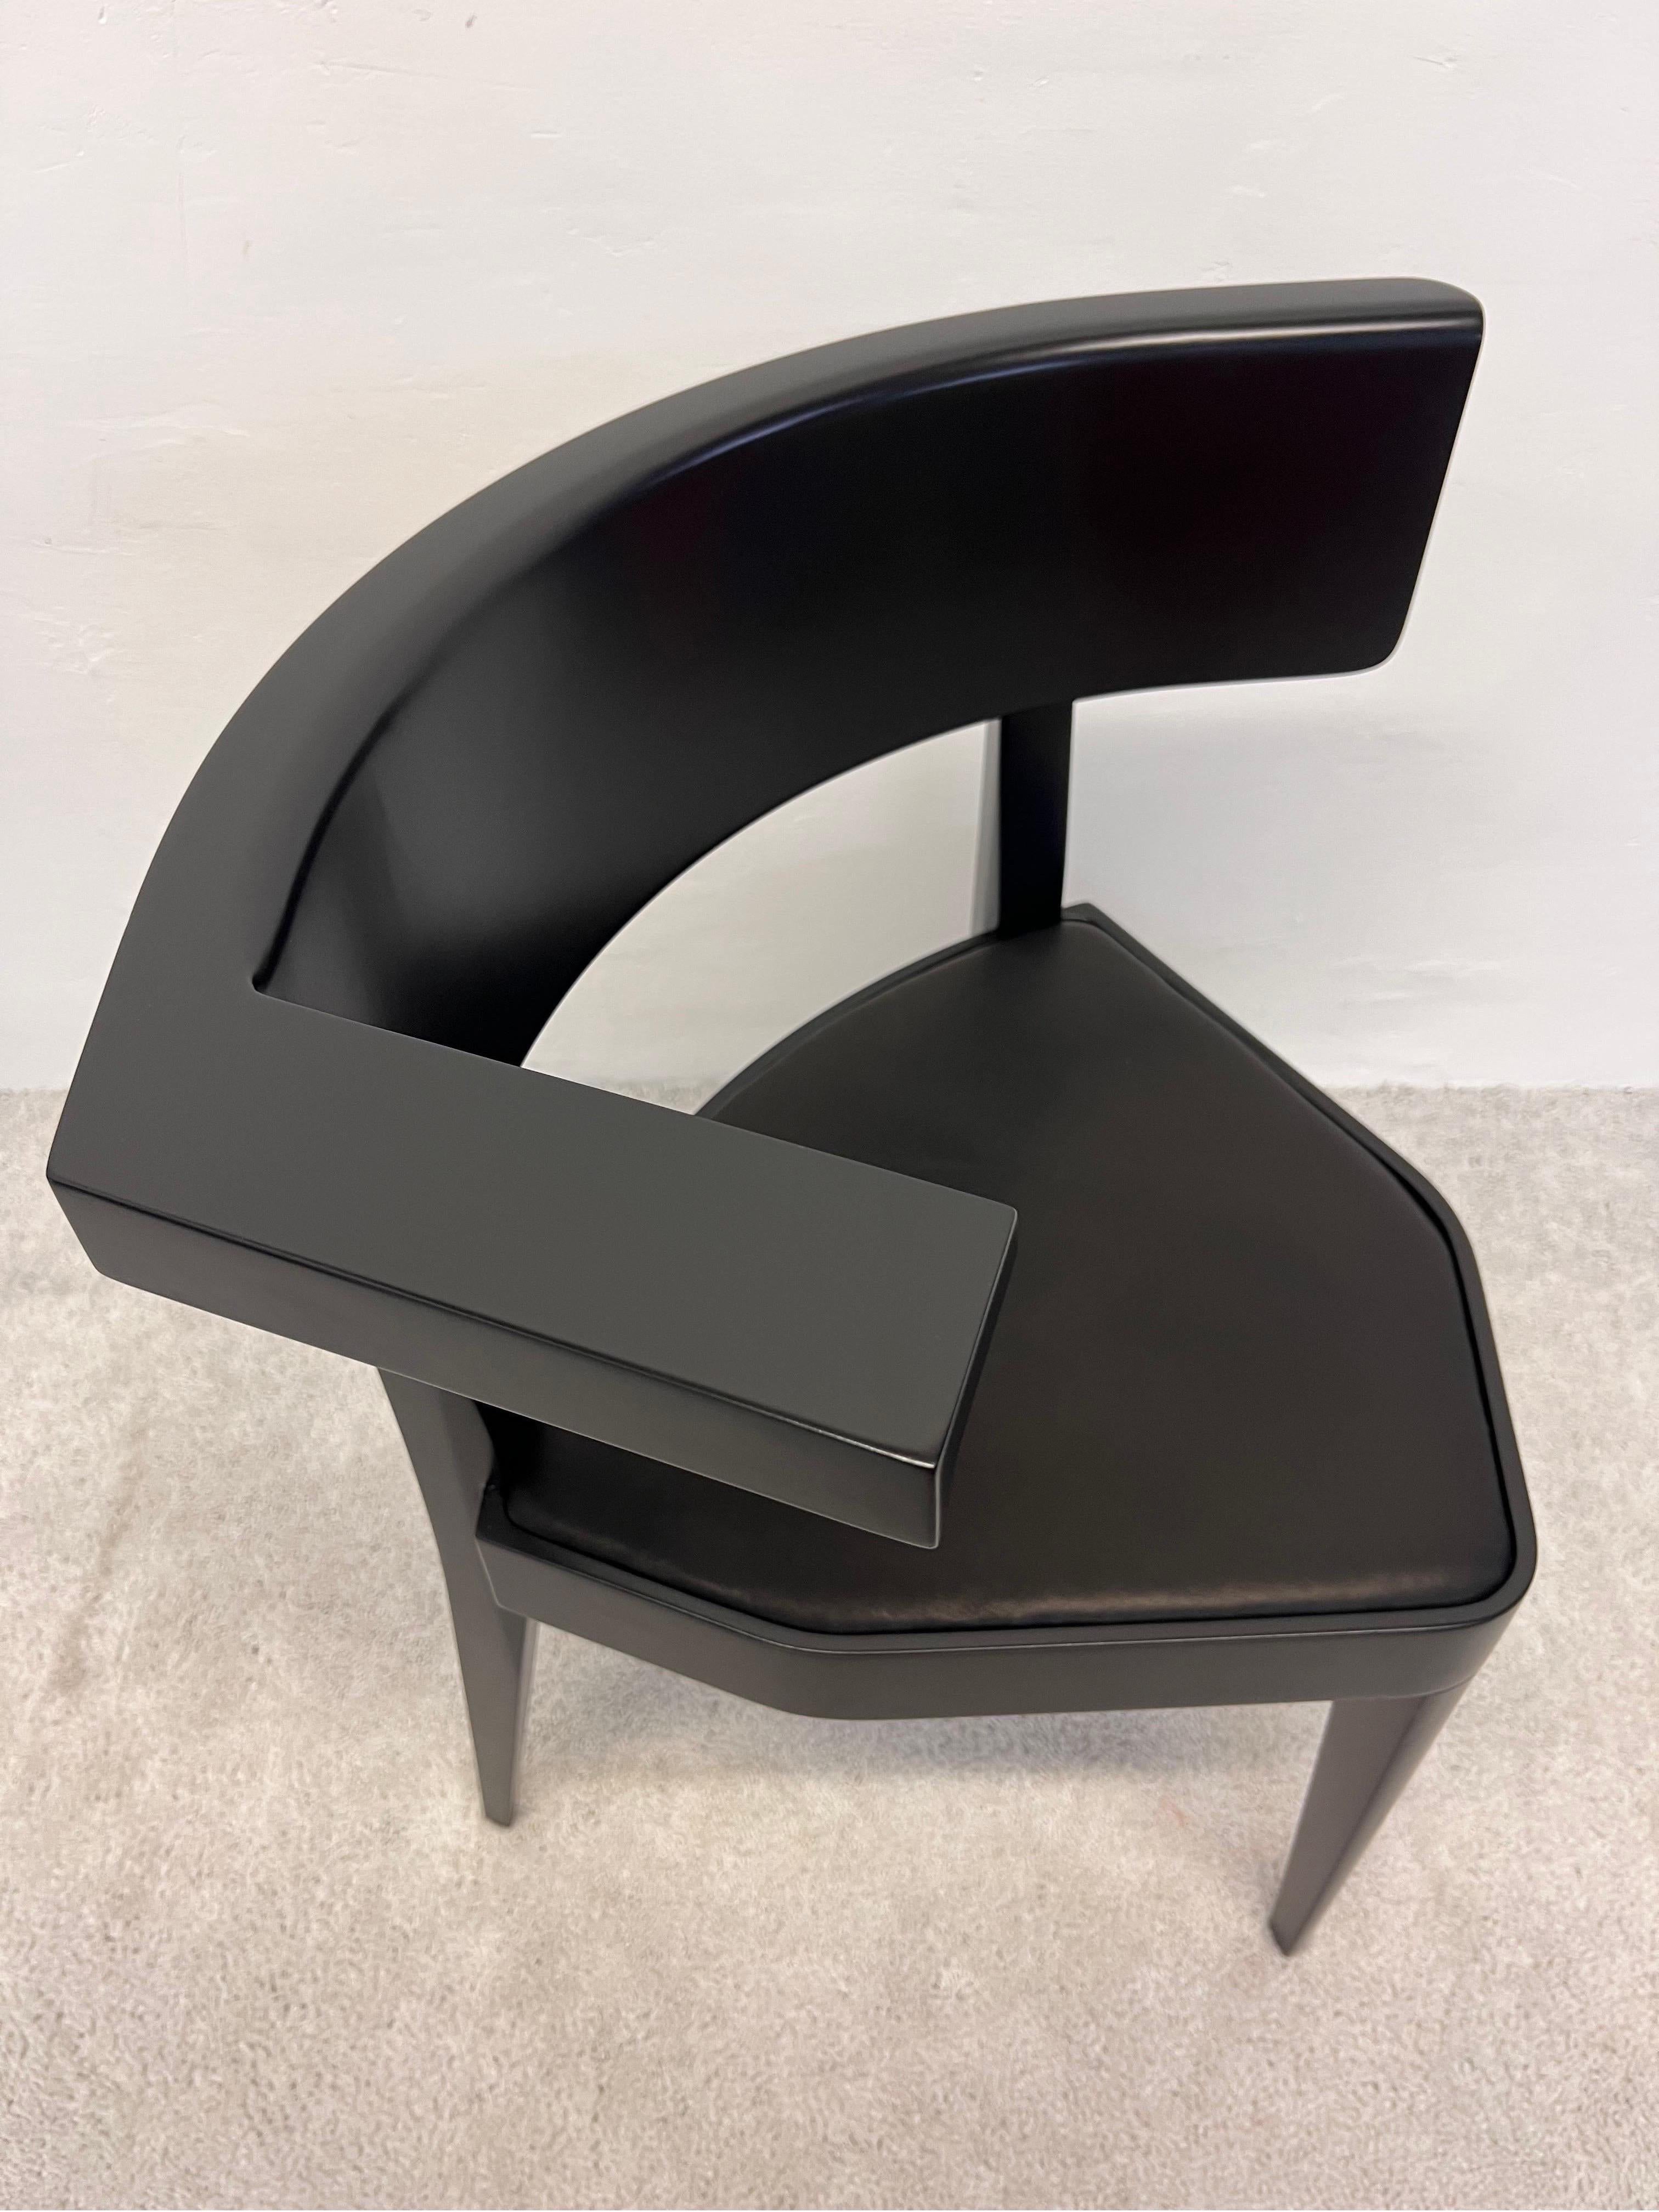 Stefan Wewerka B1 Leather Side Chair for Tecta For Sale 4